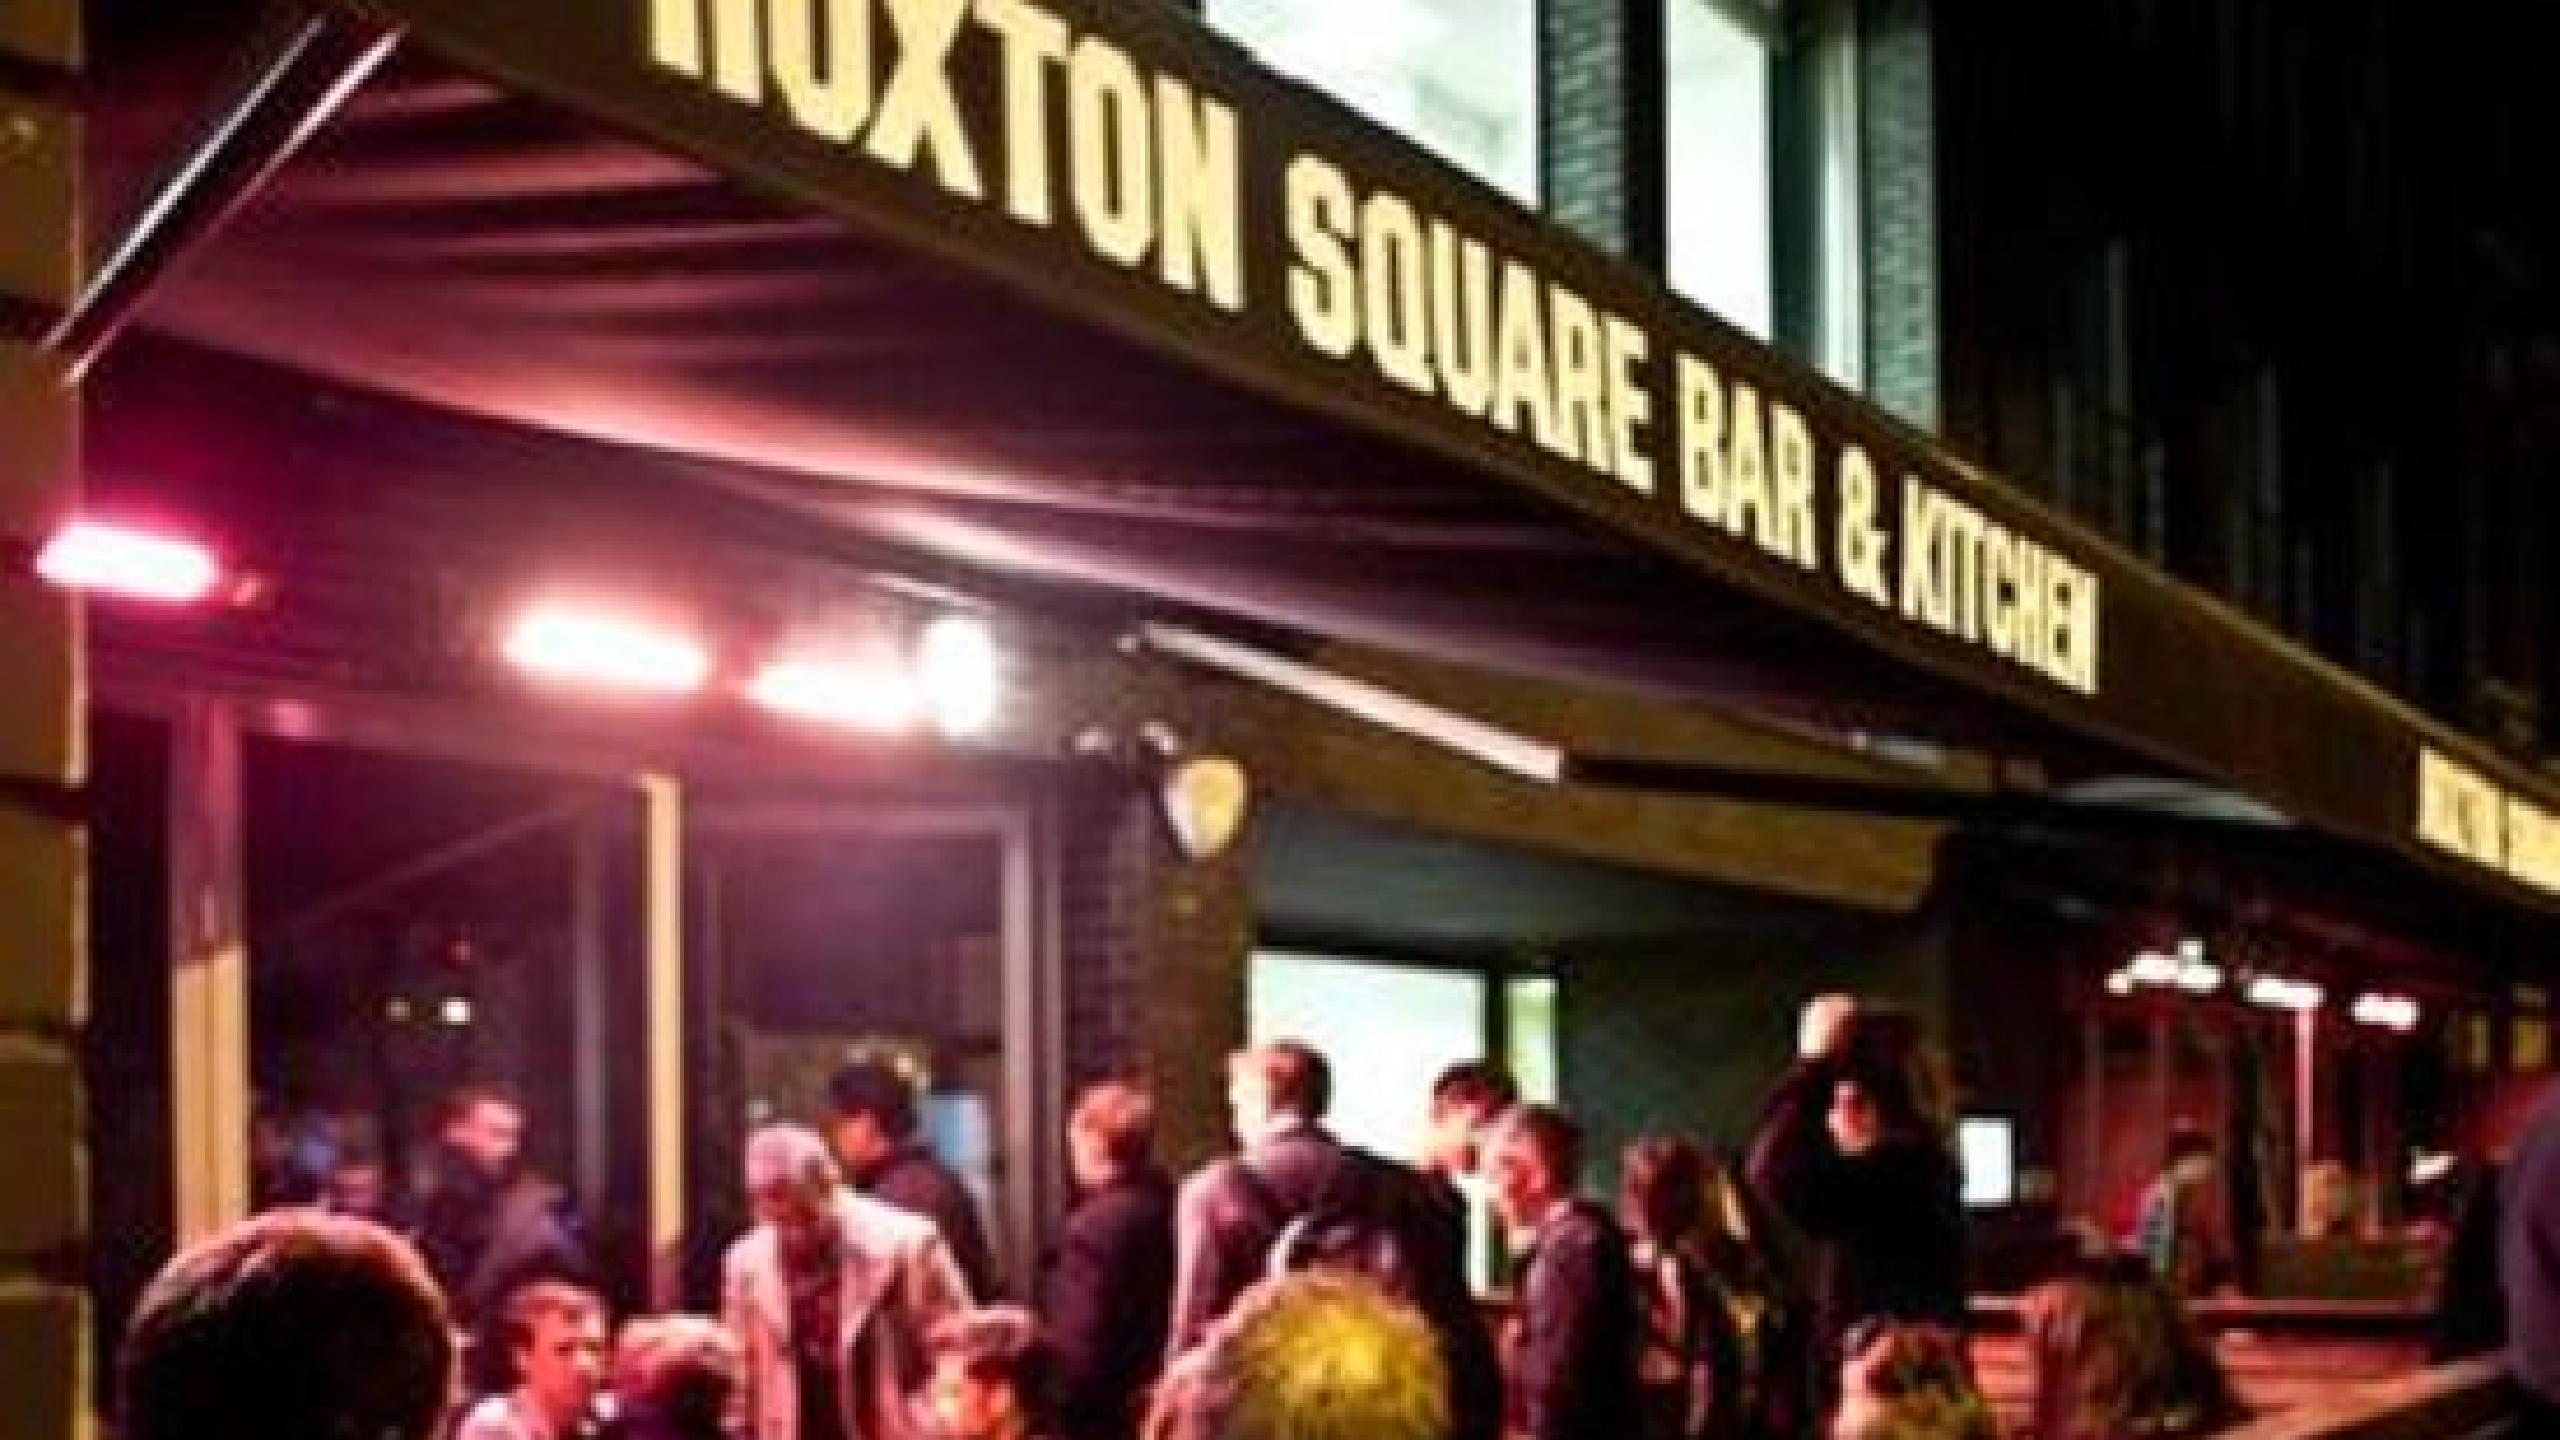 hoxton square bar and kitchen hire